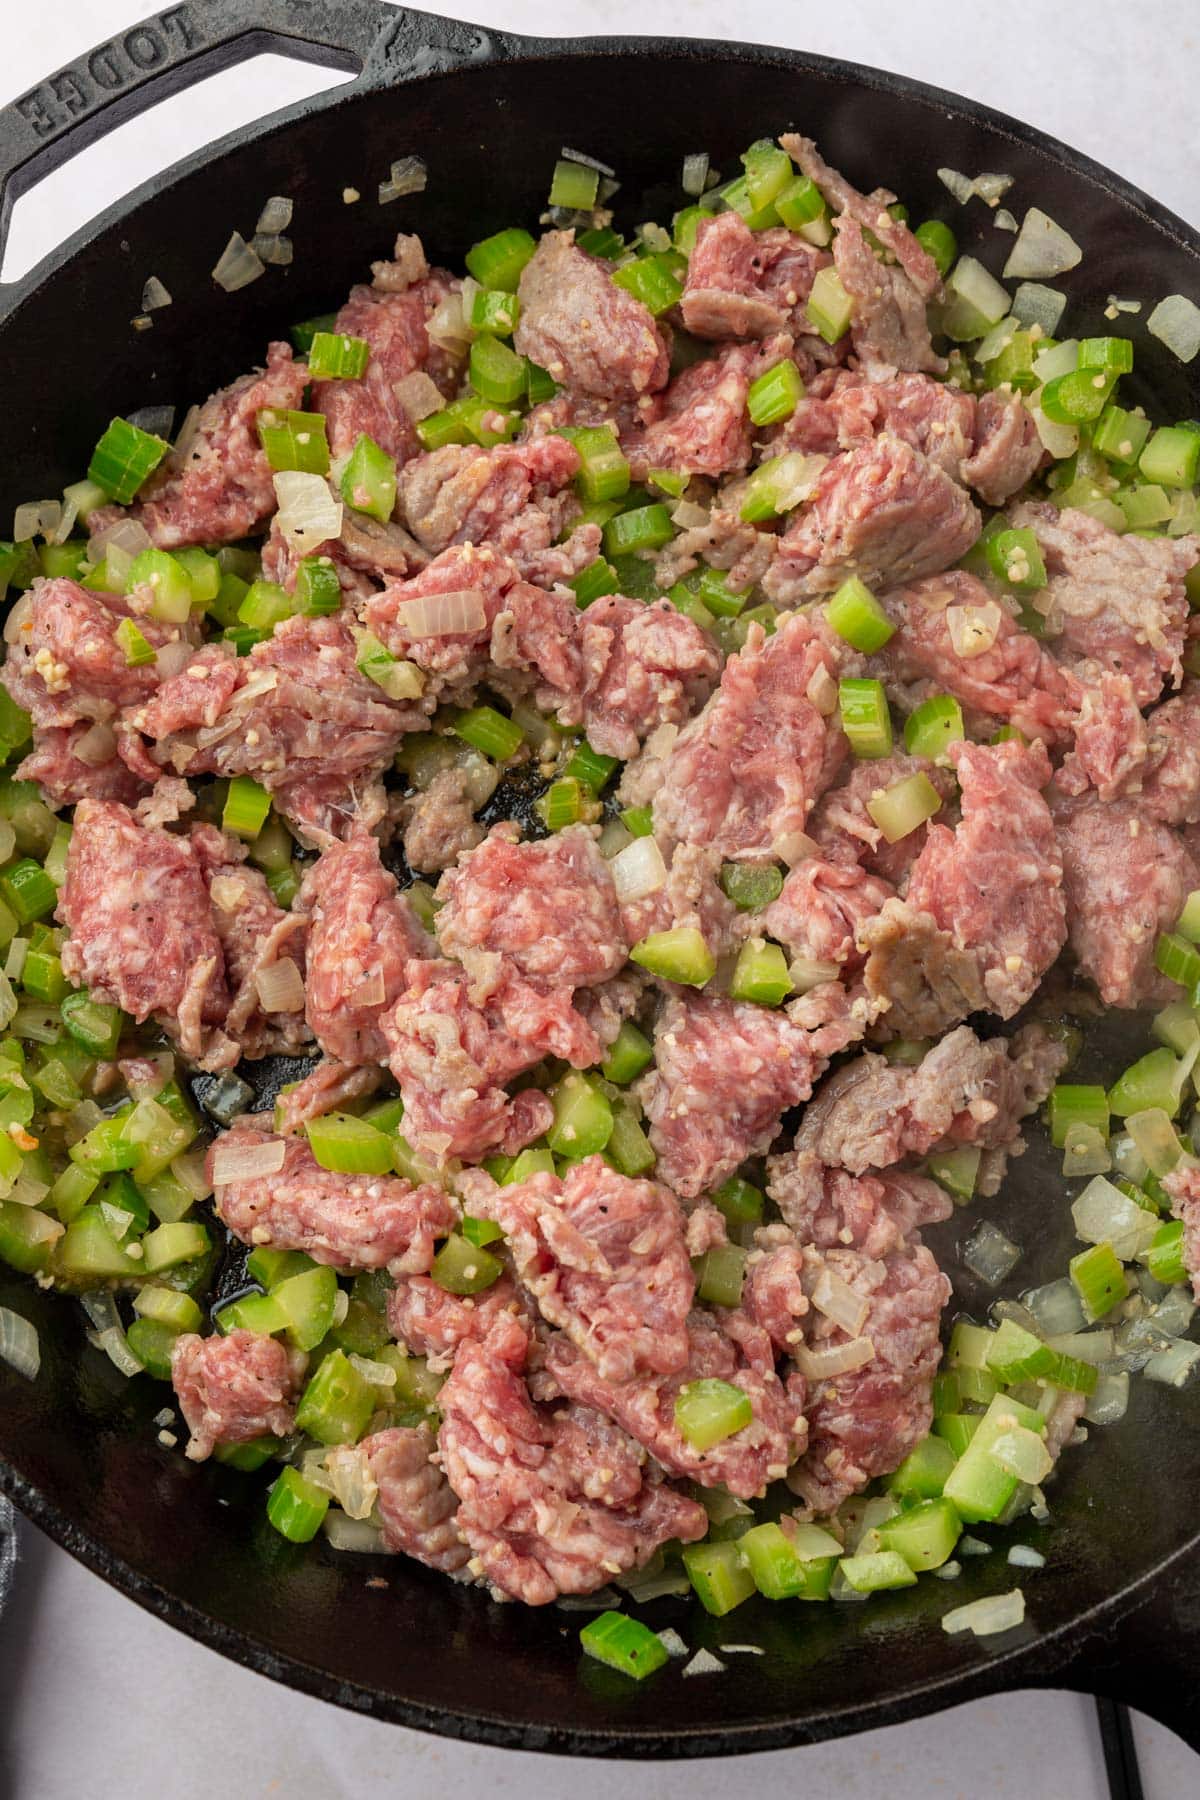 A cast iron skillet filled with raw Italian sausage mixed together with cooked diced celery and diced onions.